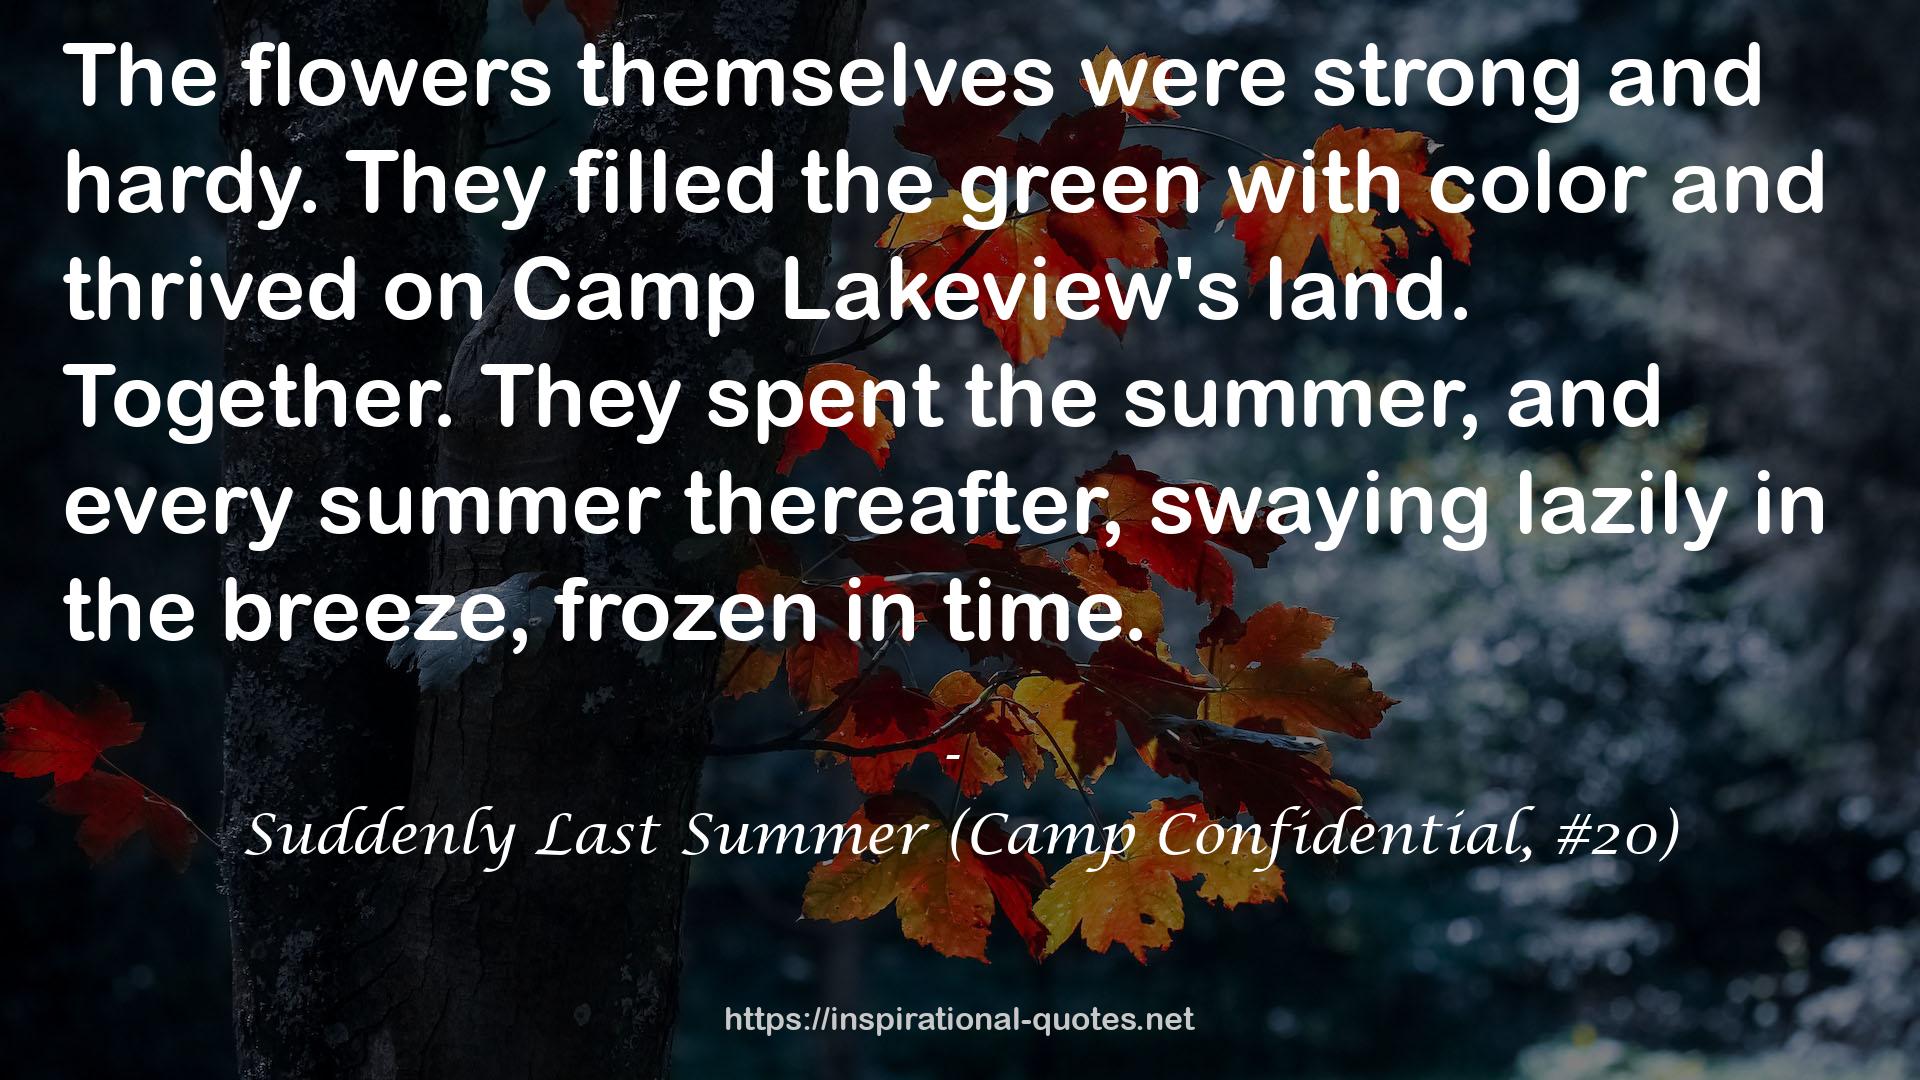 Suddenly Last Summer (Camp Confidential, #20) QUOTES